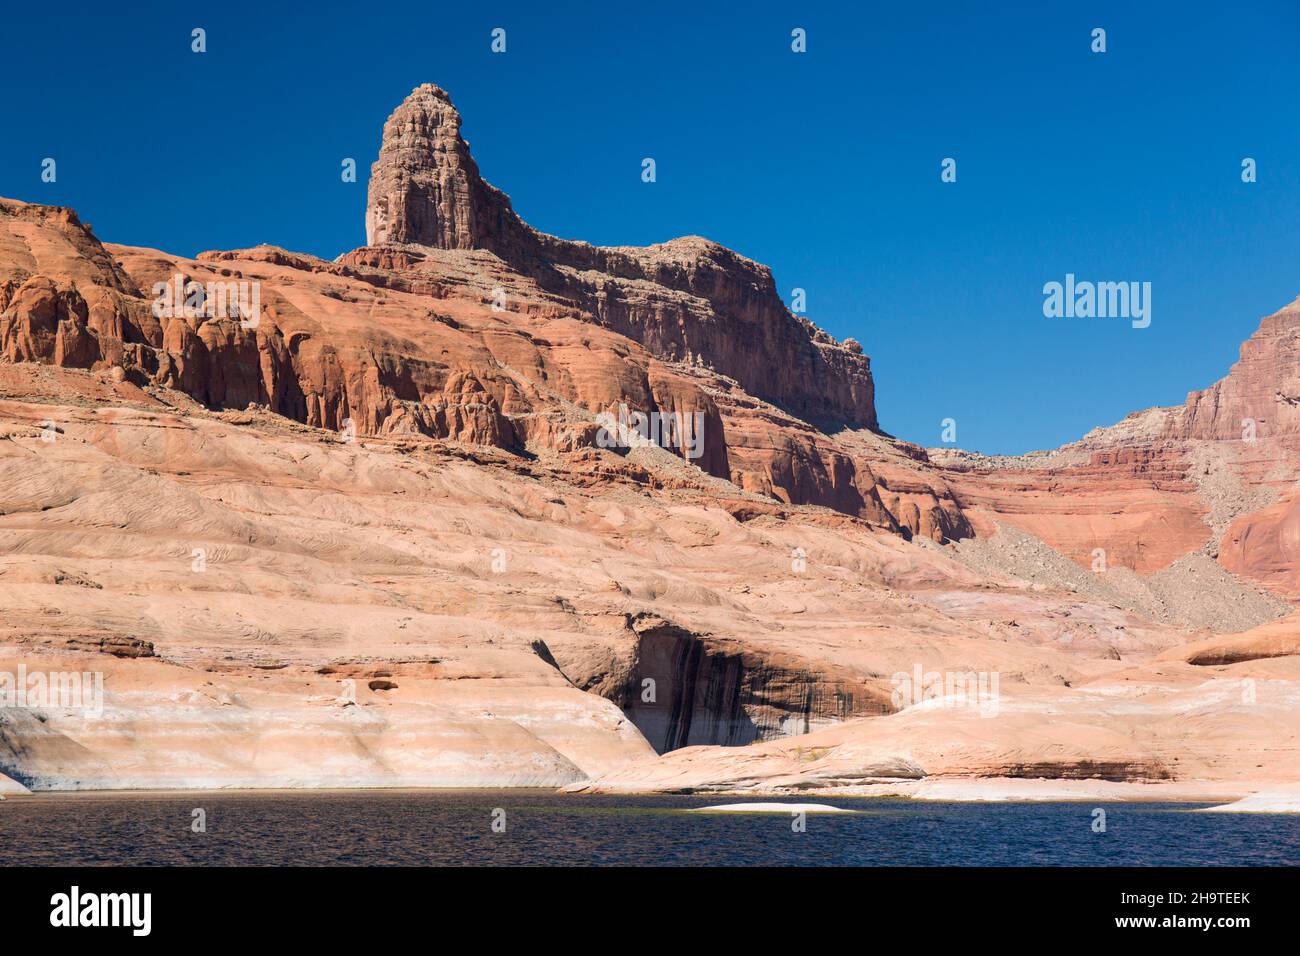 Glen Canyon National Recreation Area, Utah, USA. High sandstone butte towering above Lake Powell. Stock Photo